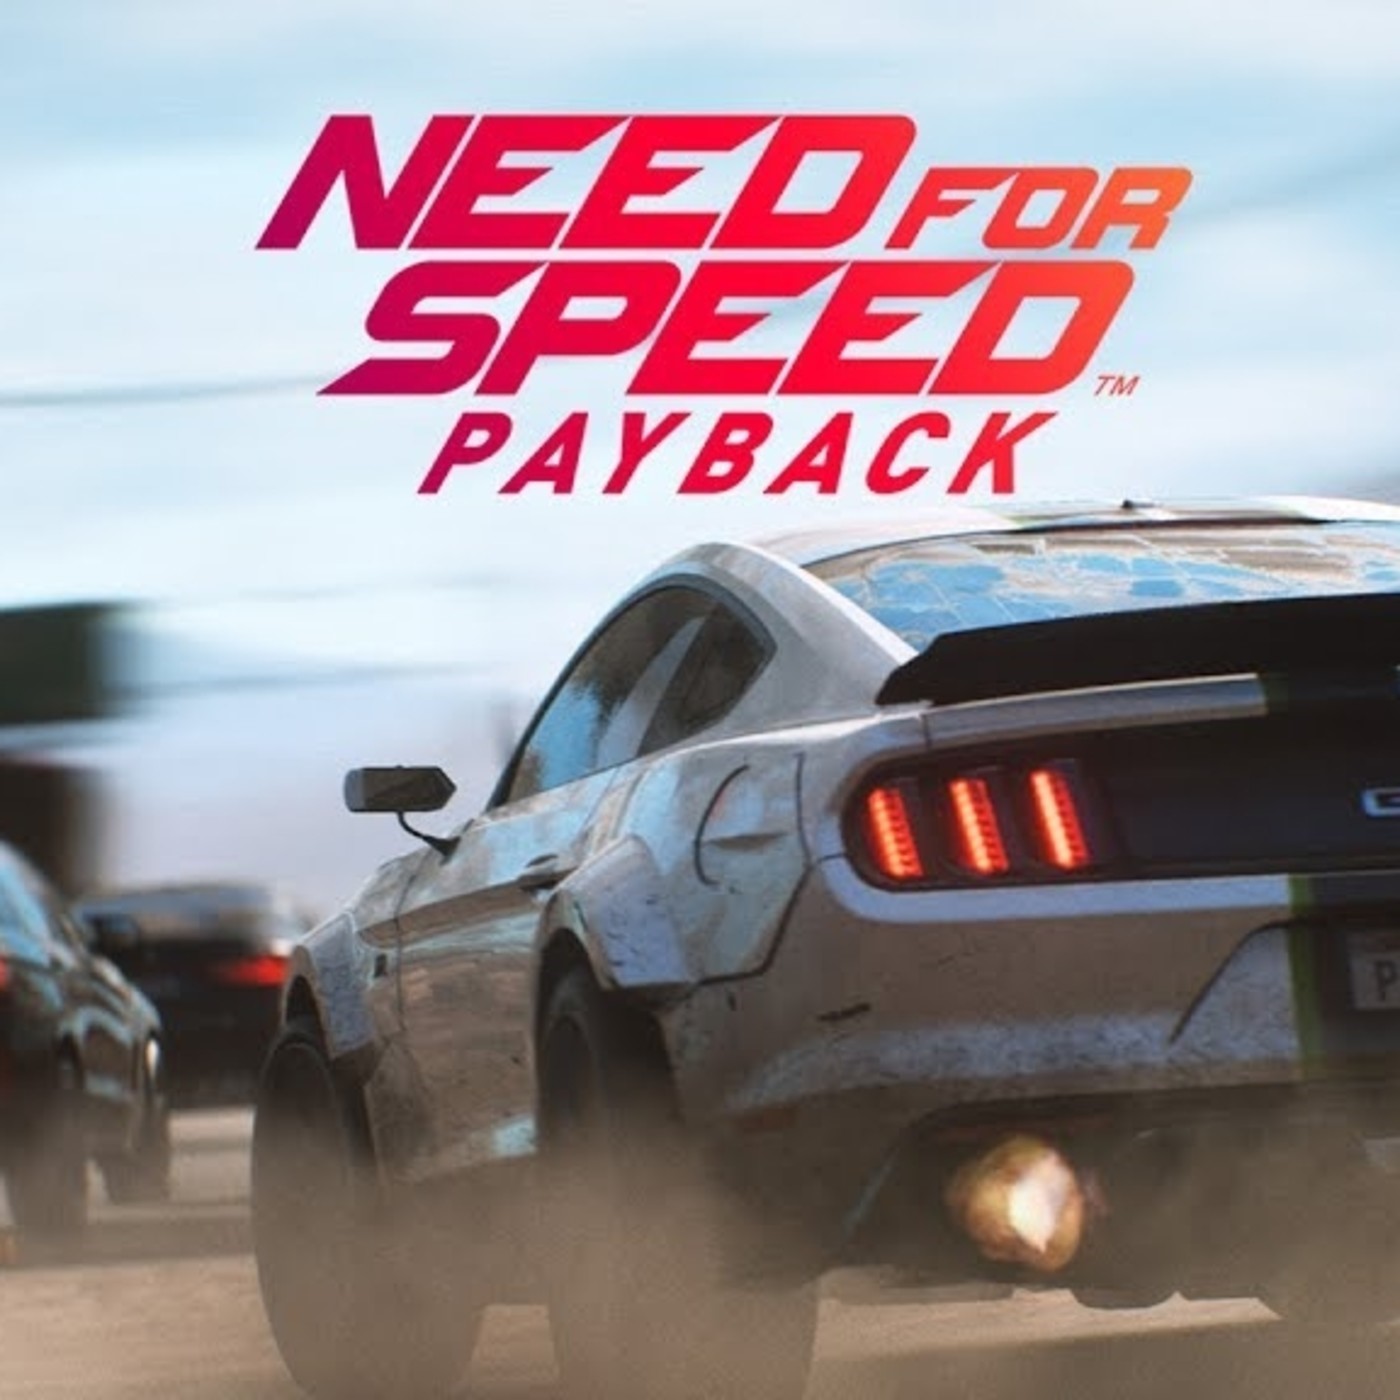 Need for Speed пейбек. Need for Speed Payback (ps4). Пэйбэк 3. NFS Payback ps5.